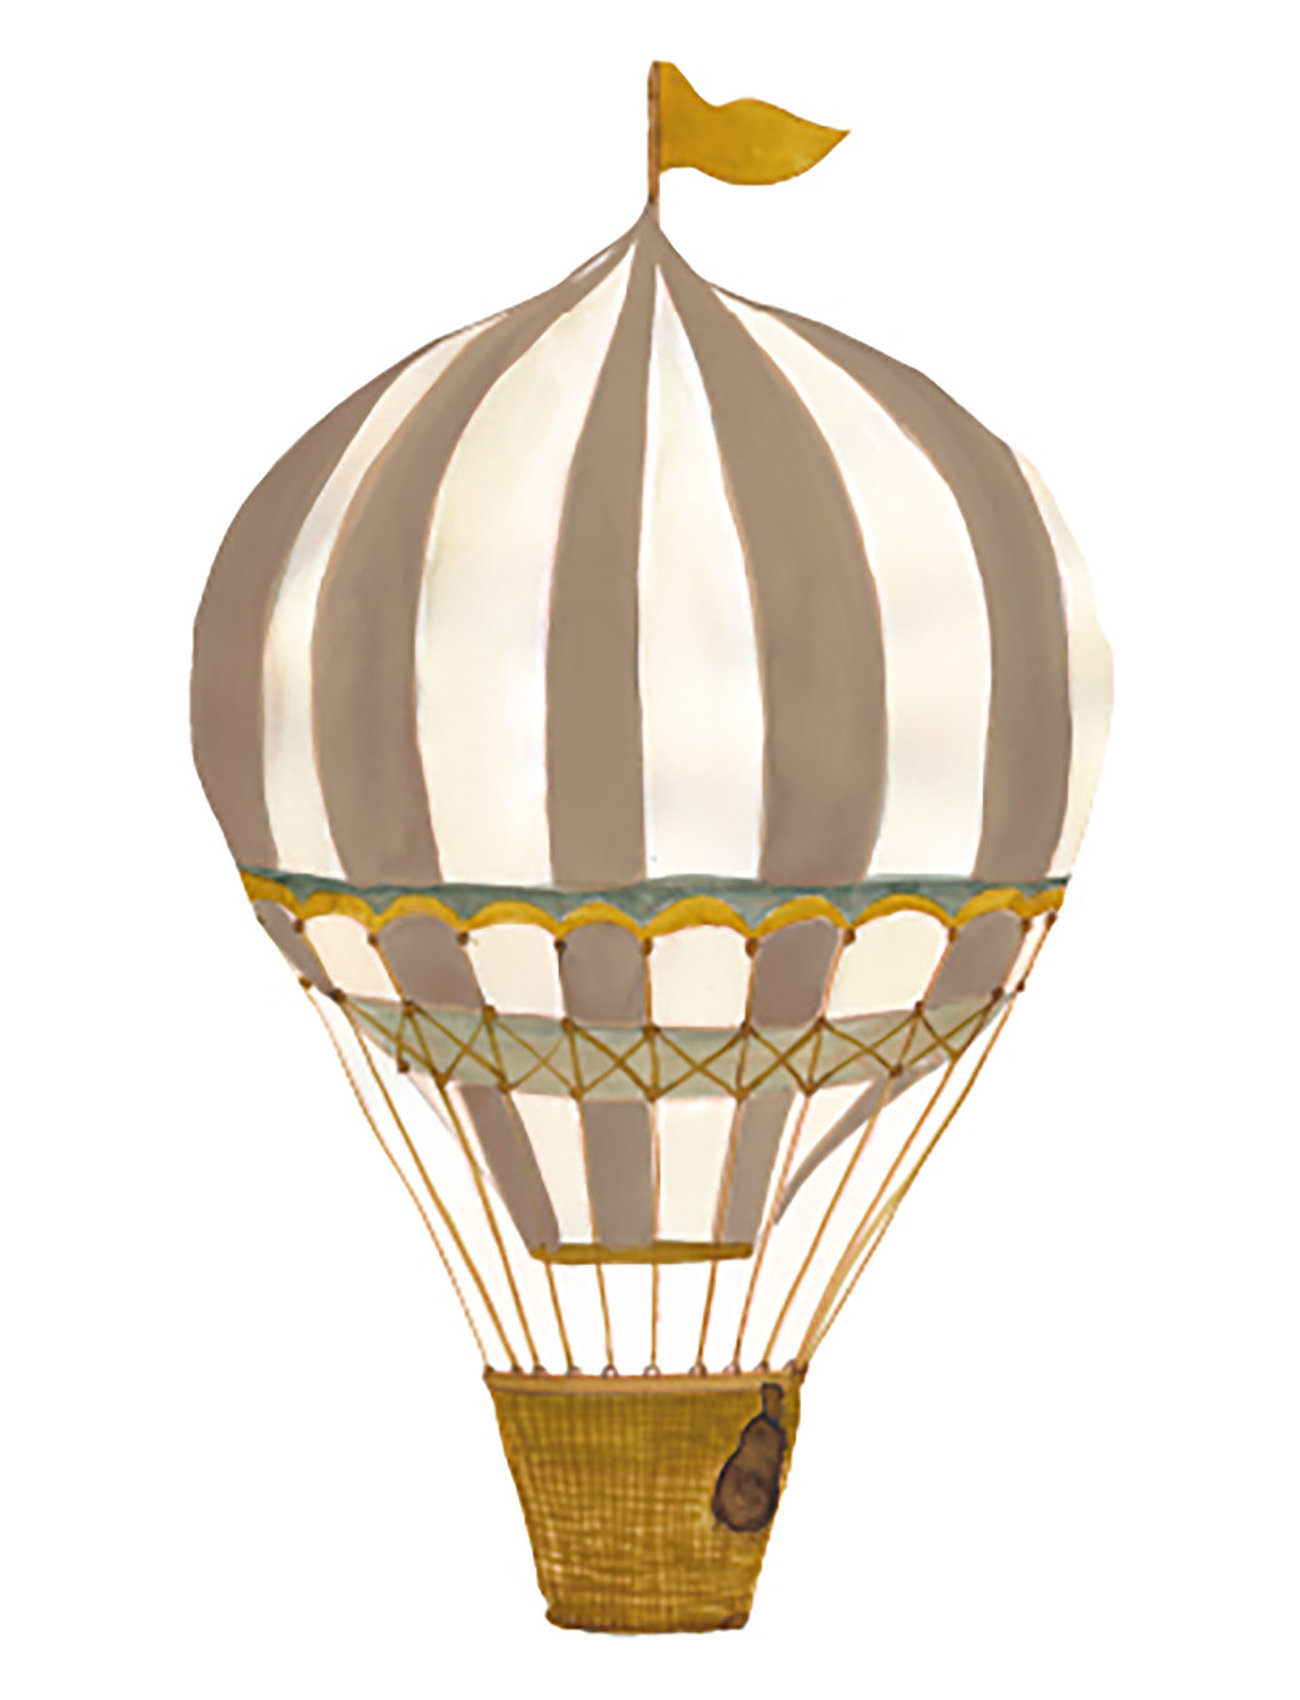 Retro Air Balloon Large Brown Home Kids Decor Wall Stickers Vehicles Multi/patterned That's Mine